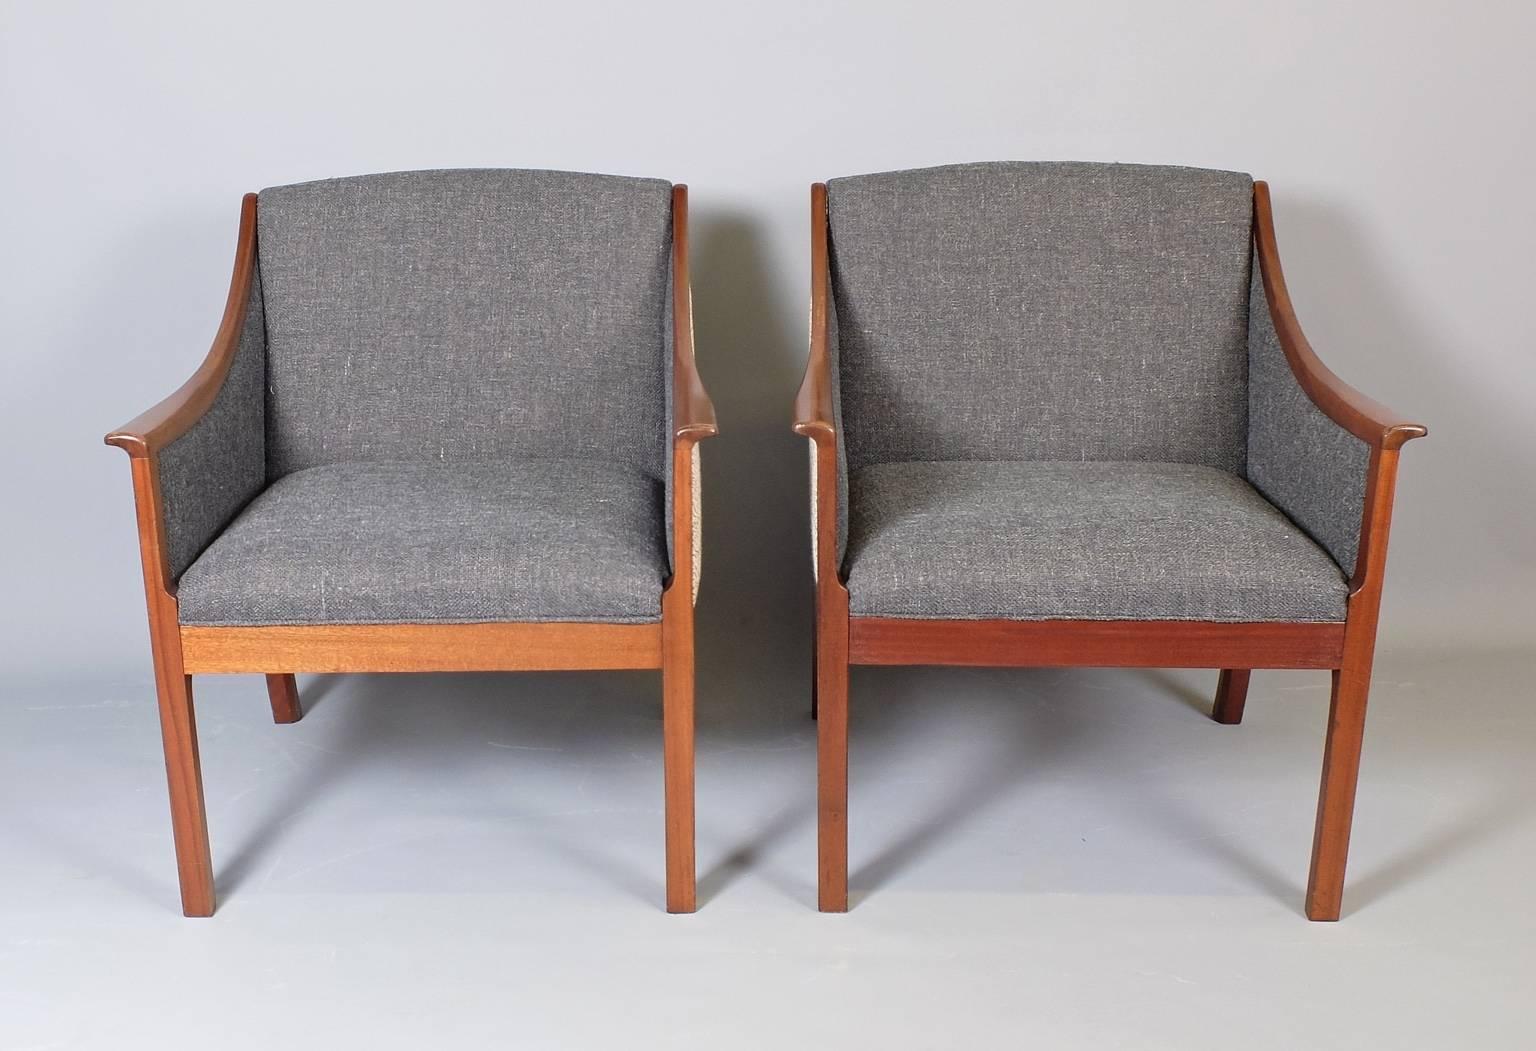 A pair of armchairs and matching sofa designed by Ole Wanscher and manufactured by Poul Jeppesen in Denmark in the 1950s. The elegant mahogany frames combine Wanscher's knowledge and appreciation of classical, antique furniture forms with a Danish